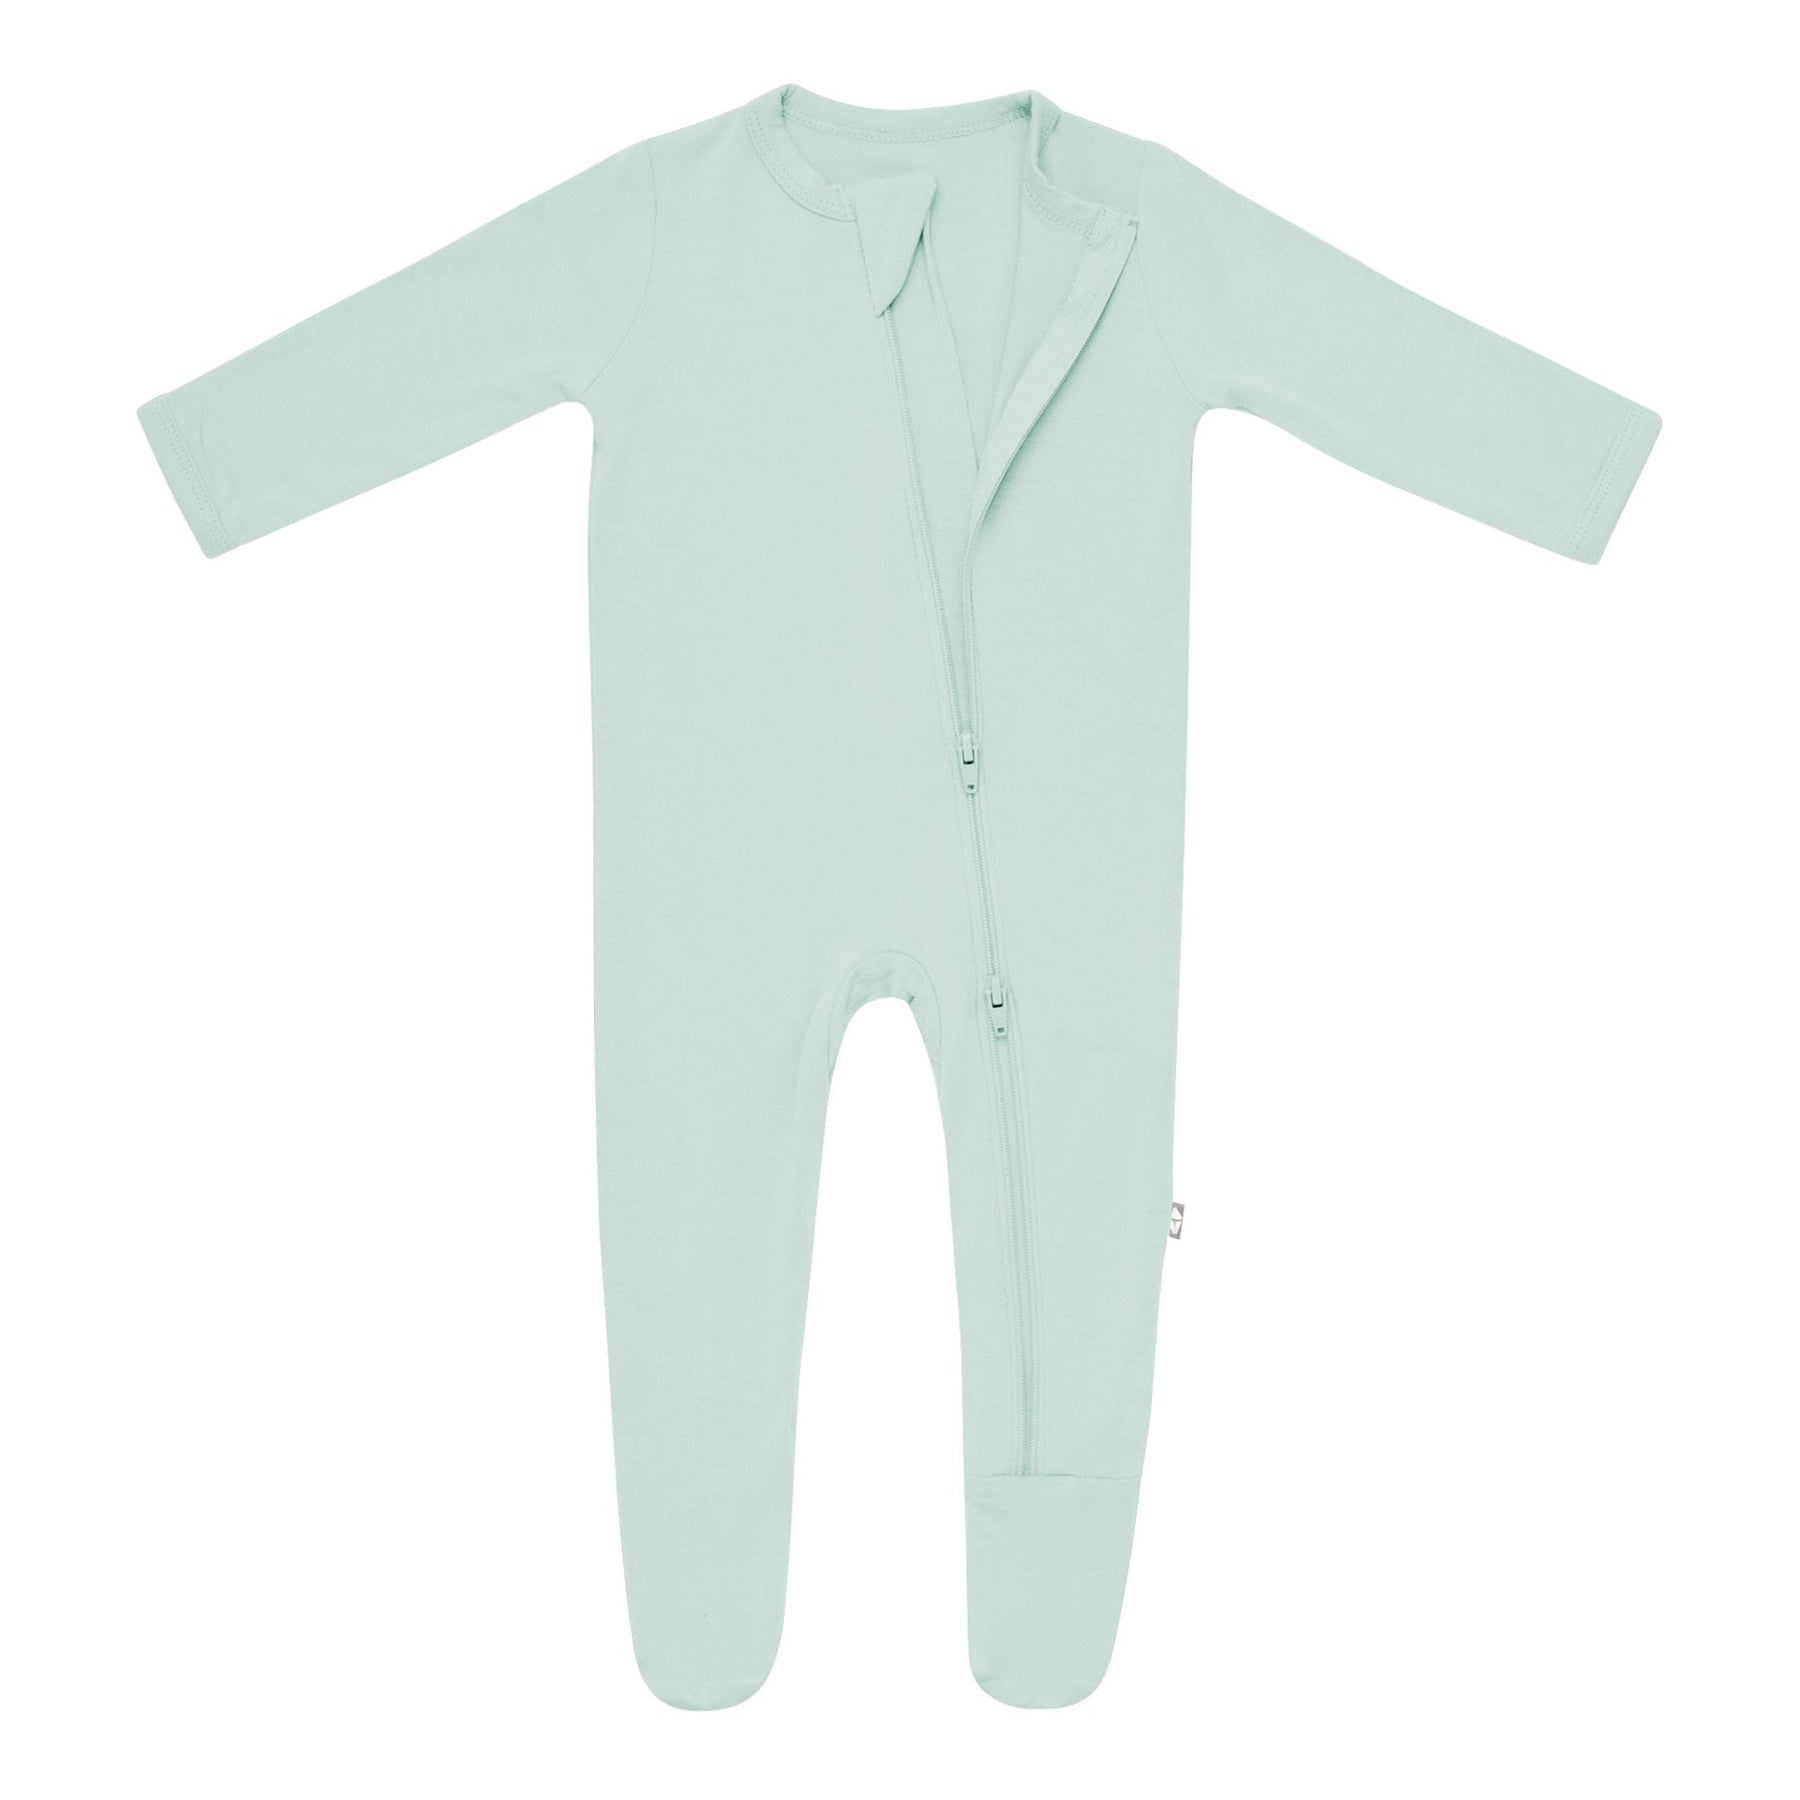 Kyte Baby Zippered Footie pajamas with dual zipper in Sage